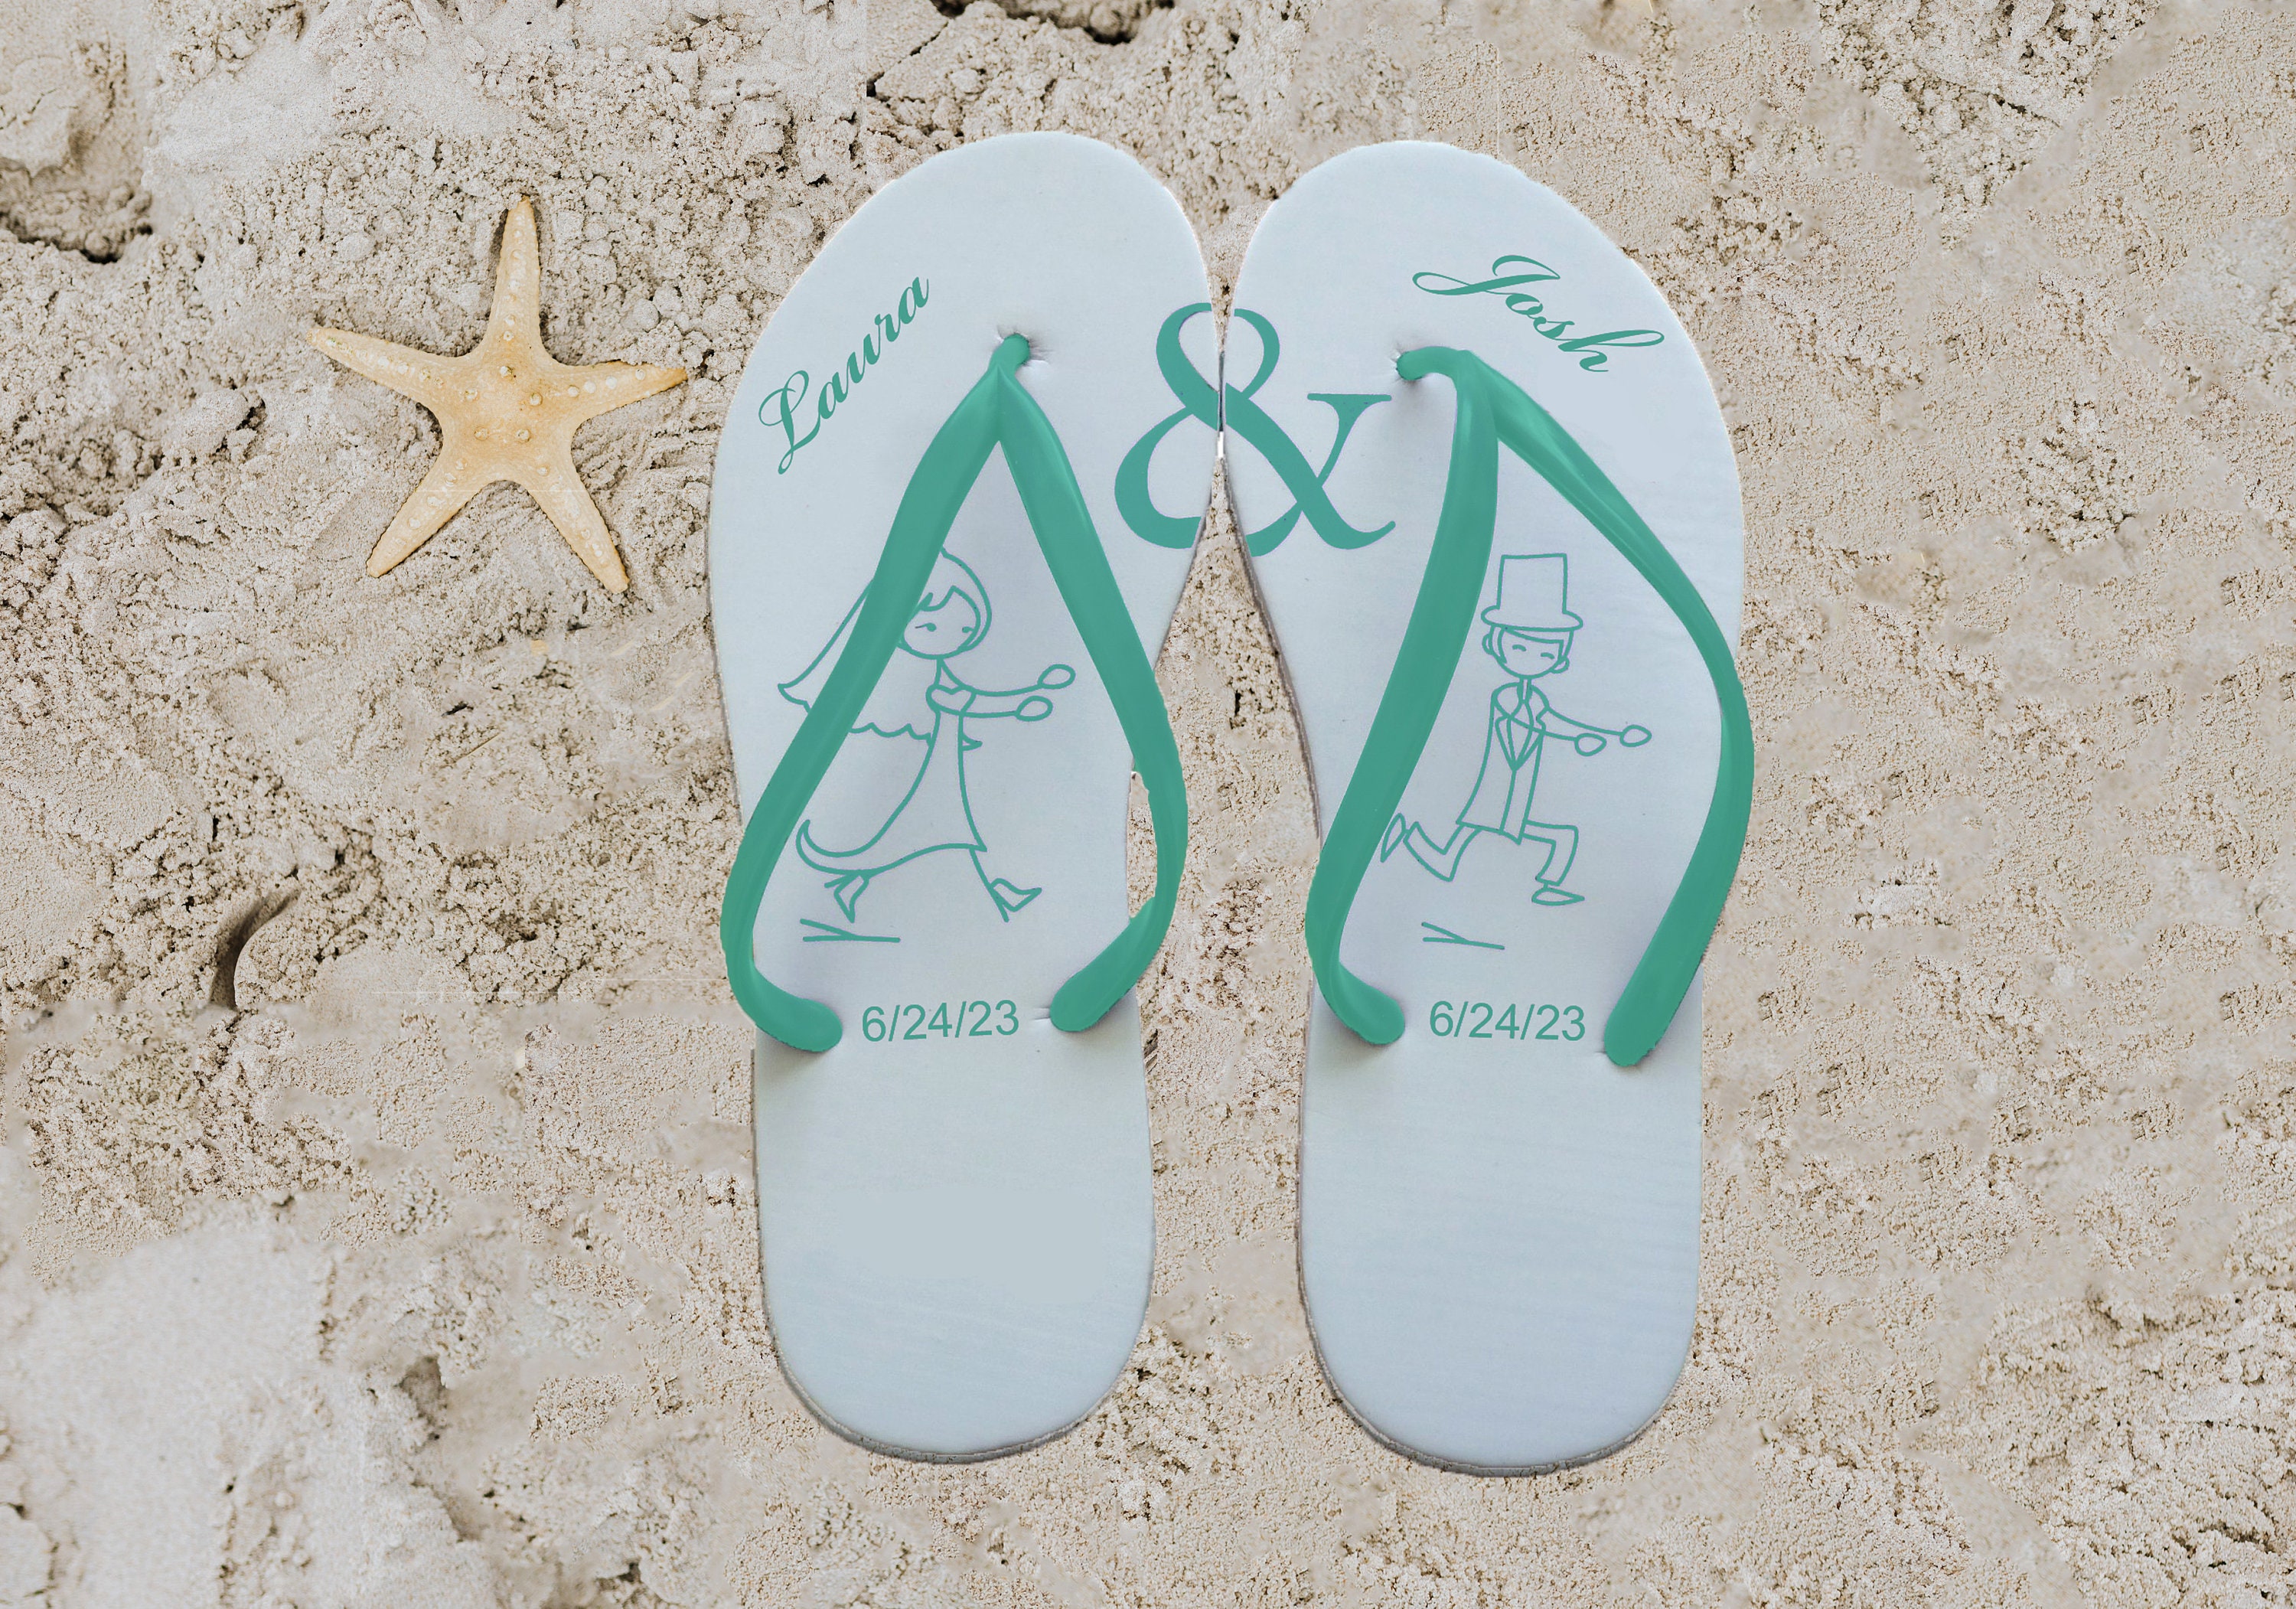 Flip-flops for Party Guests With FREE Printable Personalized